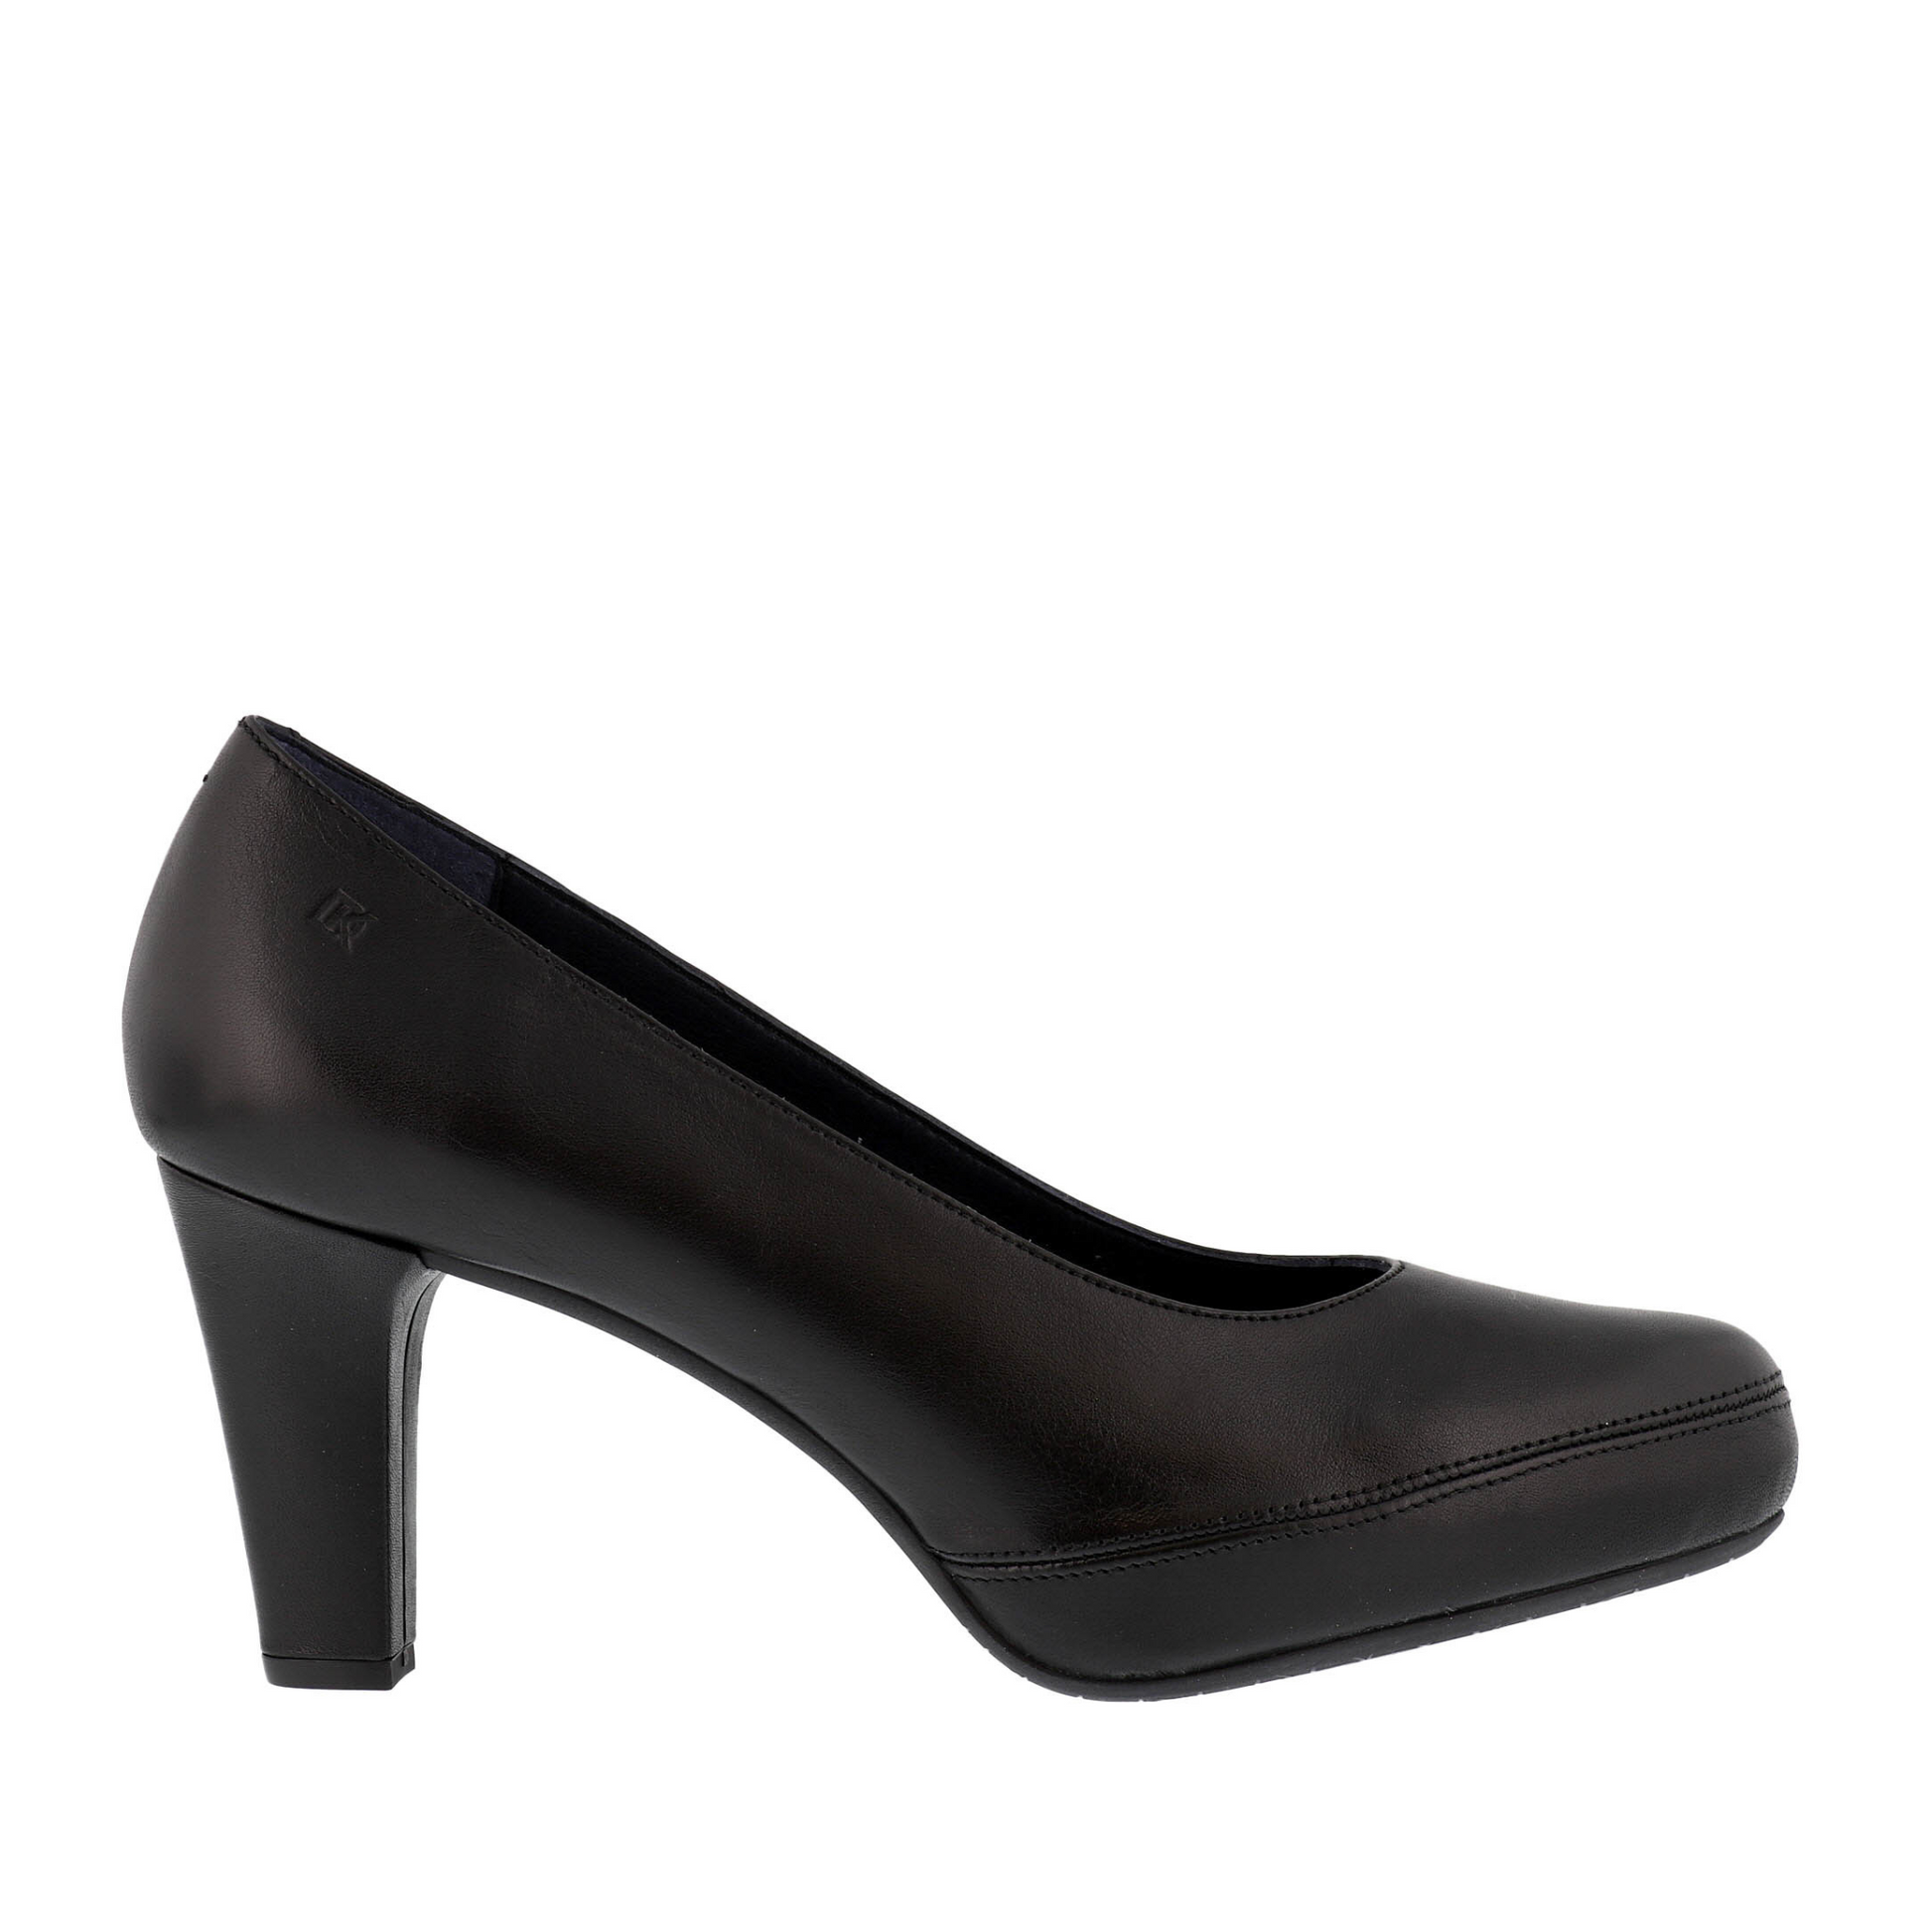 A right side view of a black leather heeled shoe.